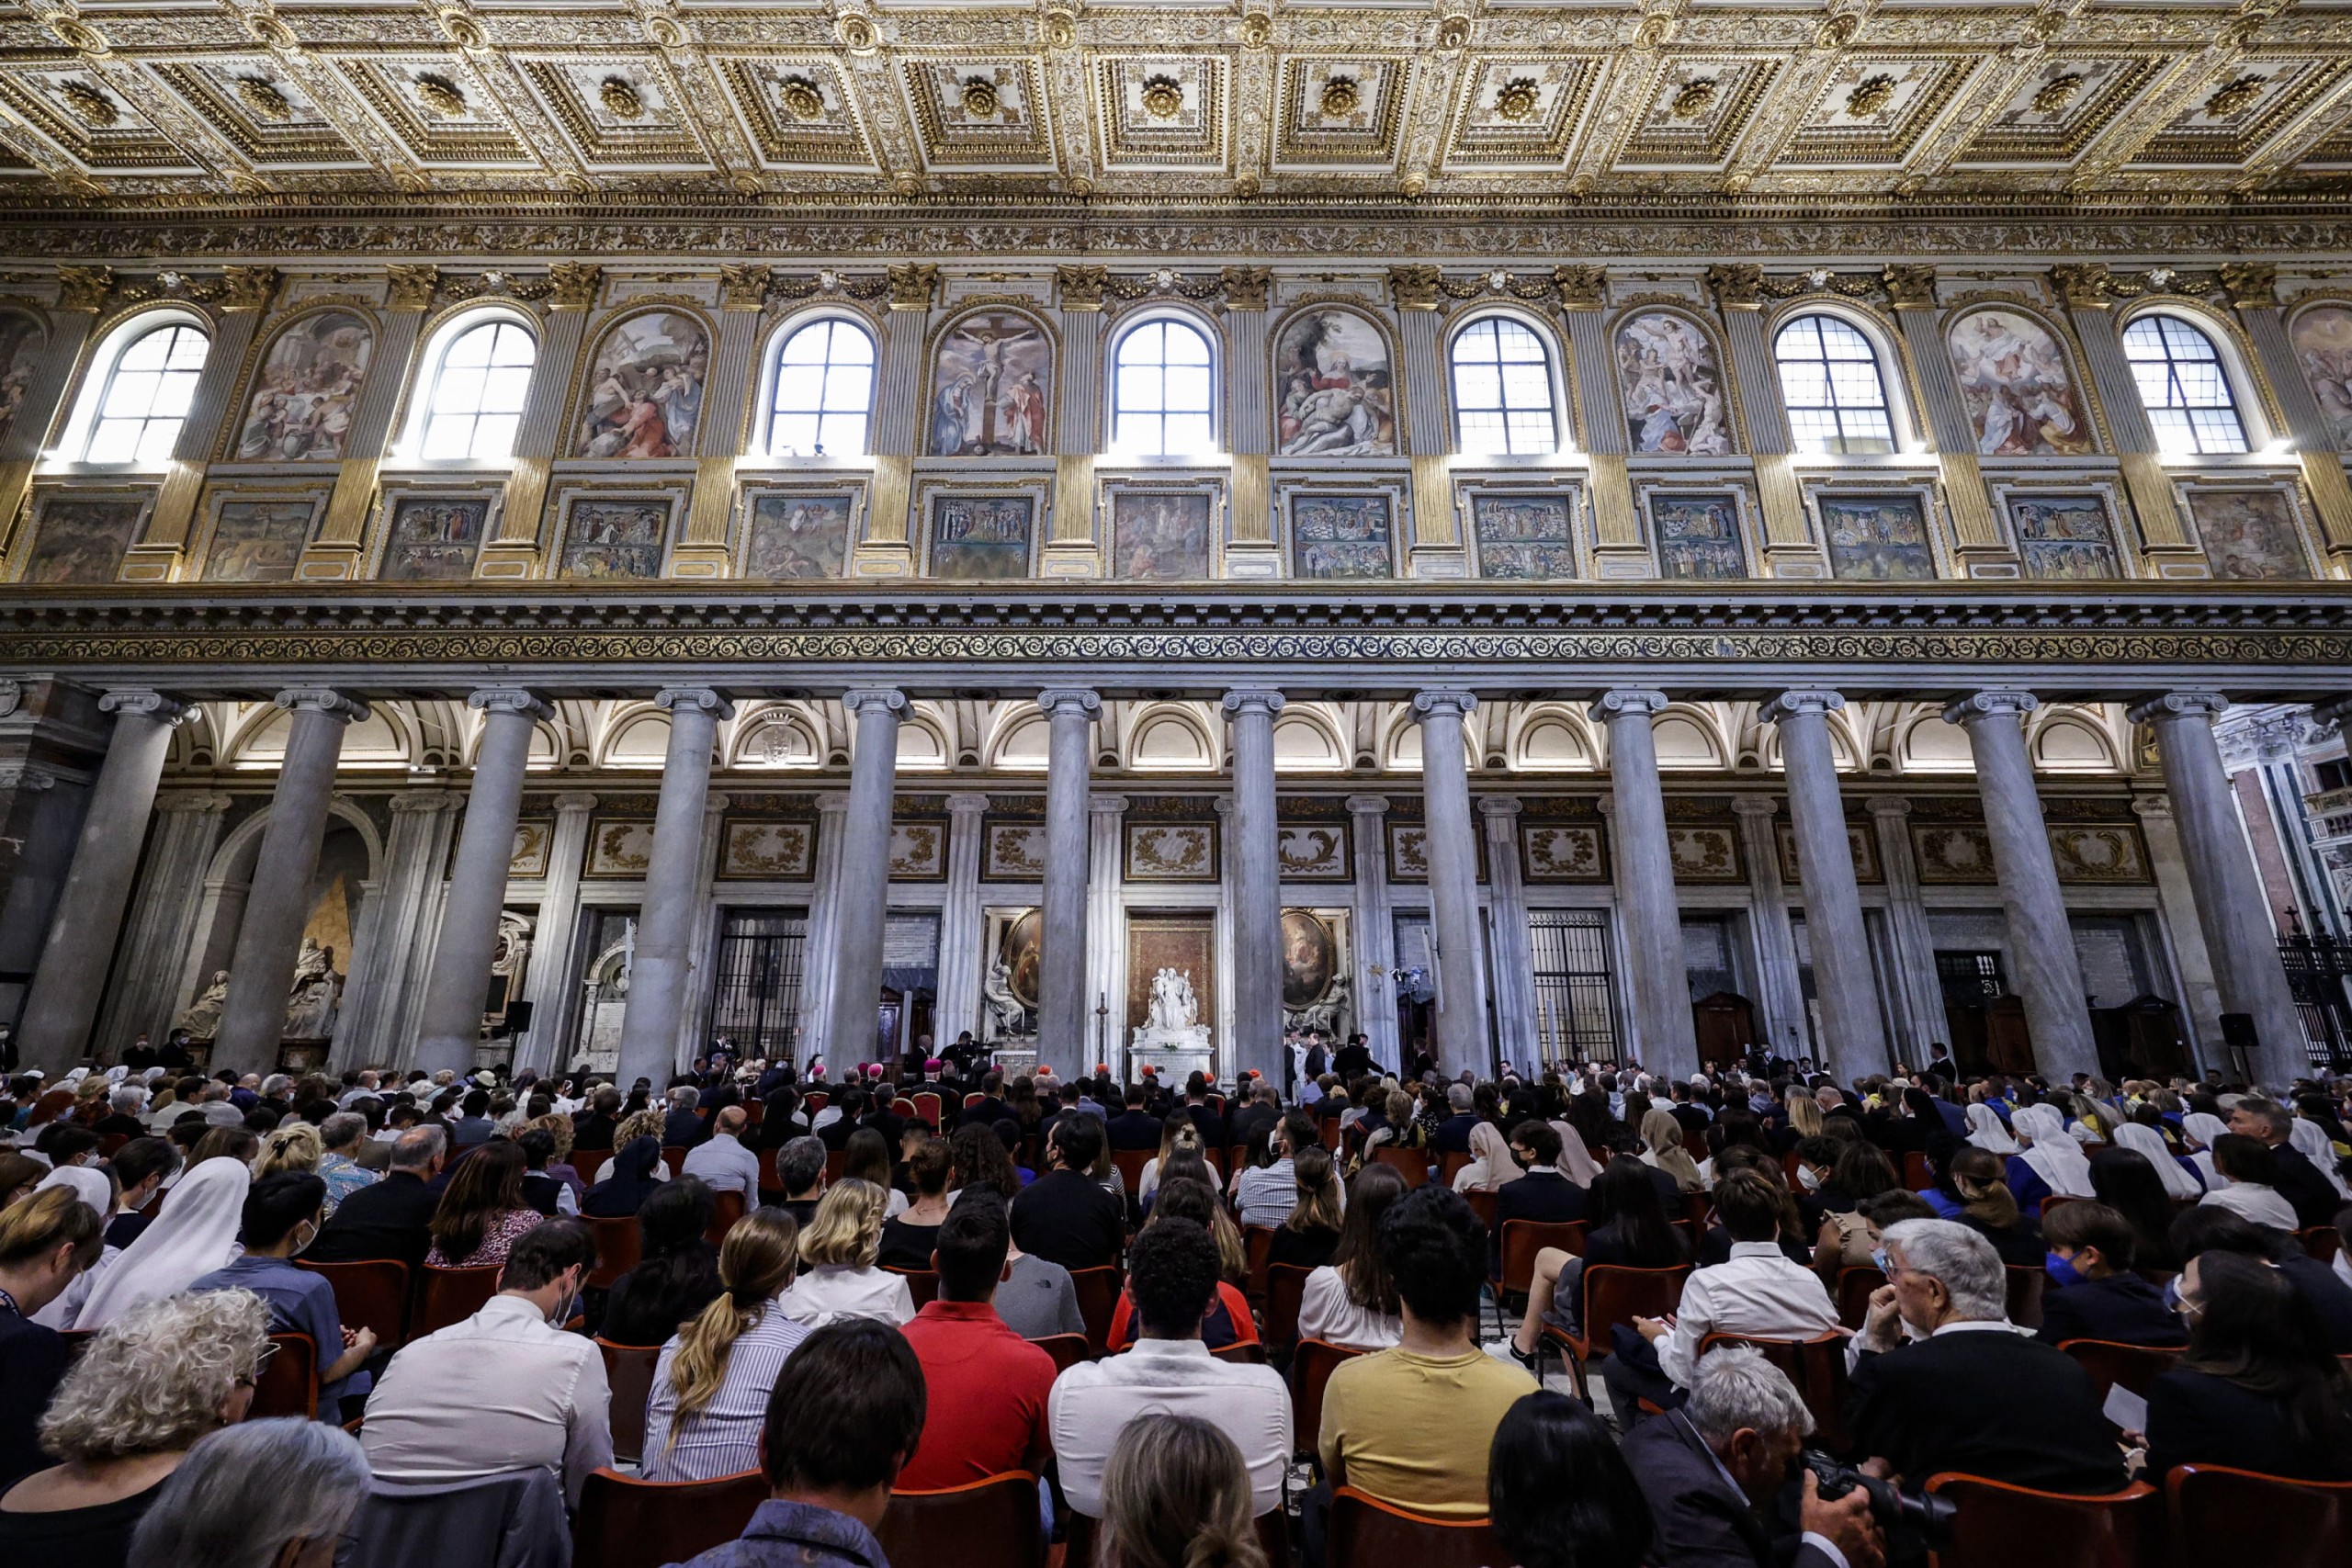 epa09988140 Faithful attend a prayer with Pope Francis during a rosary for peace at the St. Mary Major Basilica, in Rome, Italy, 31 May 2022.  EPA/FABIO FRUSTACI